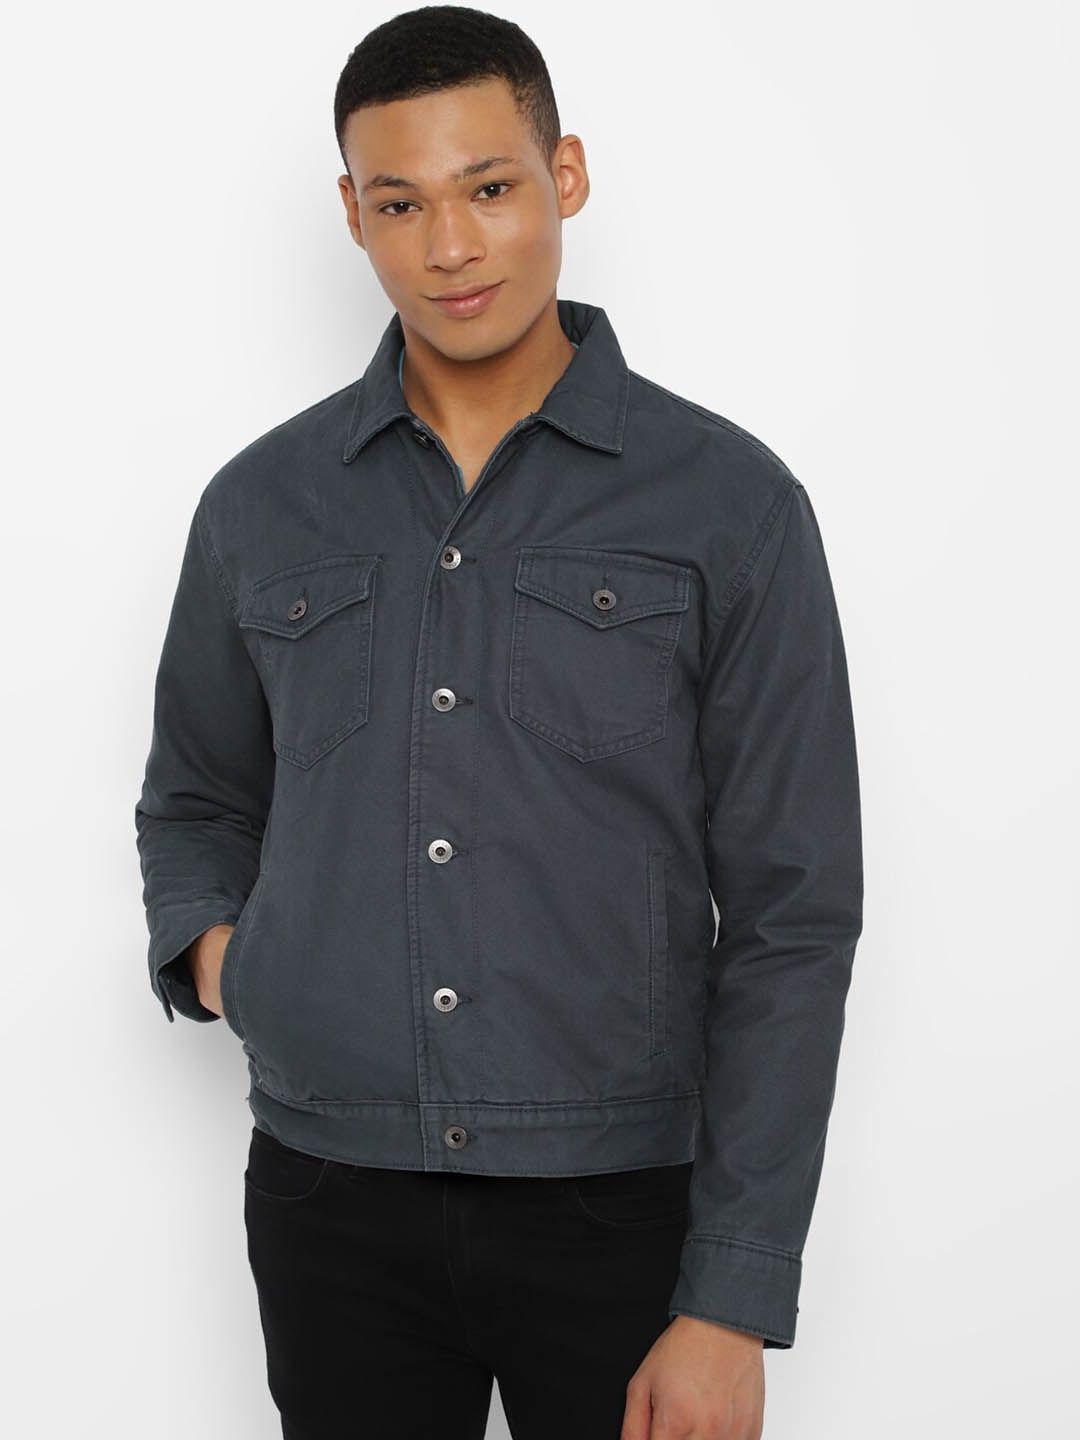 american-eagle-outfitters-spread-collar-pure-cotton-denim-jacket